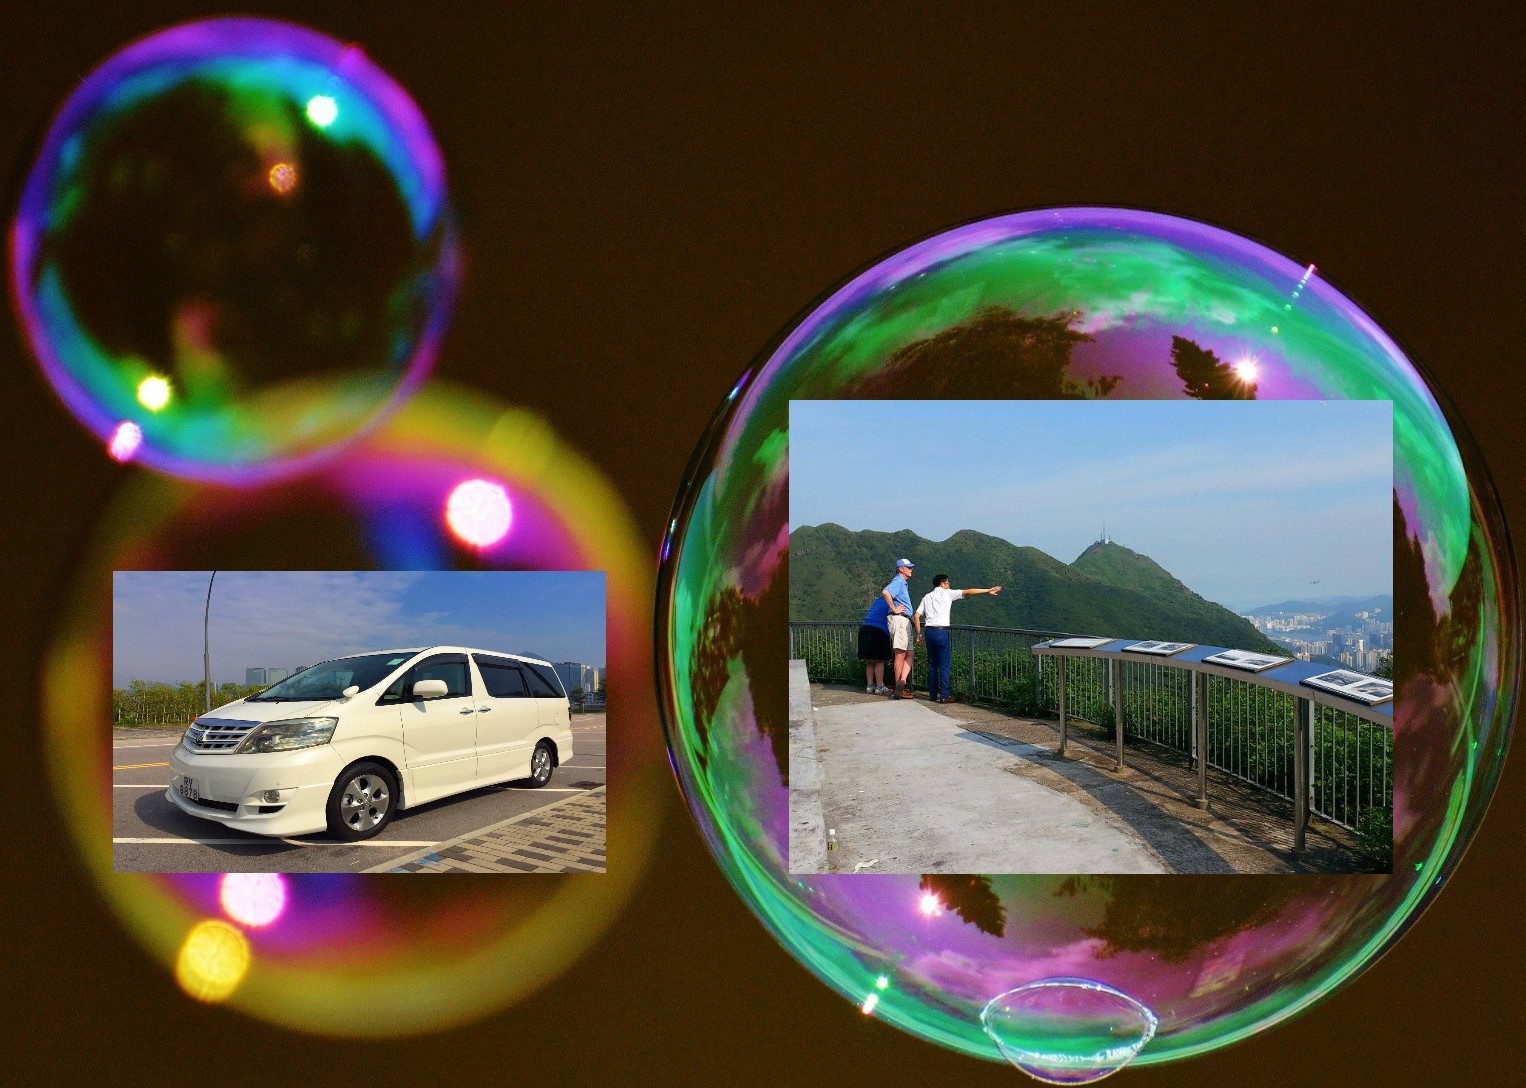 Frank shows Hong Kong private tour can offer easy and safe experience to Singapore travelers under travel bubble